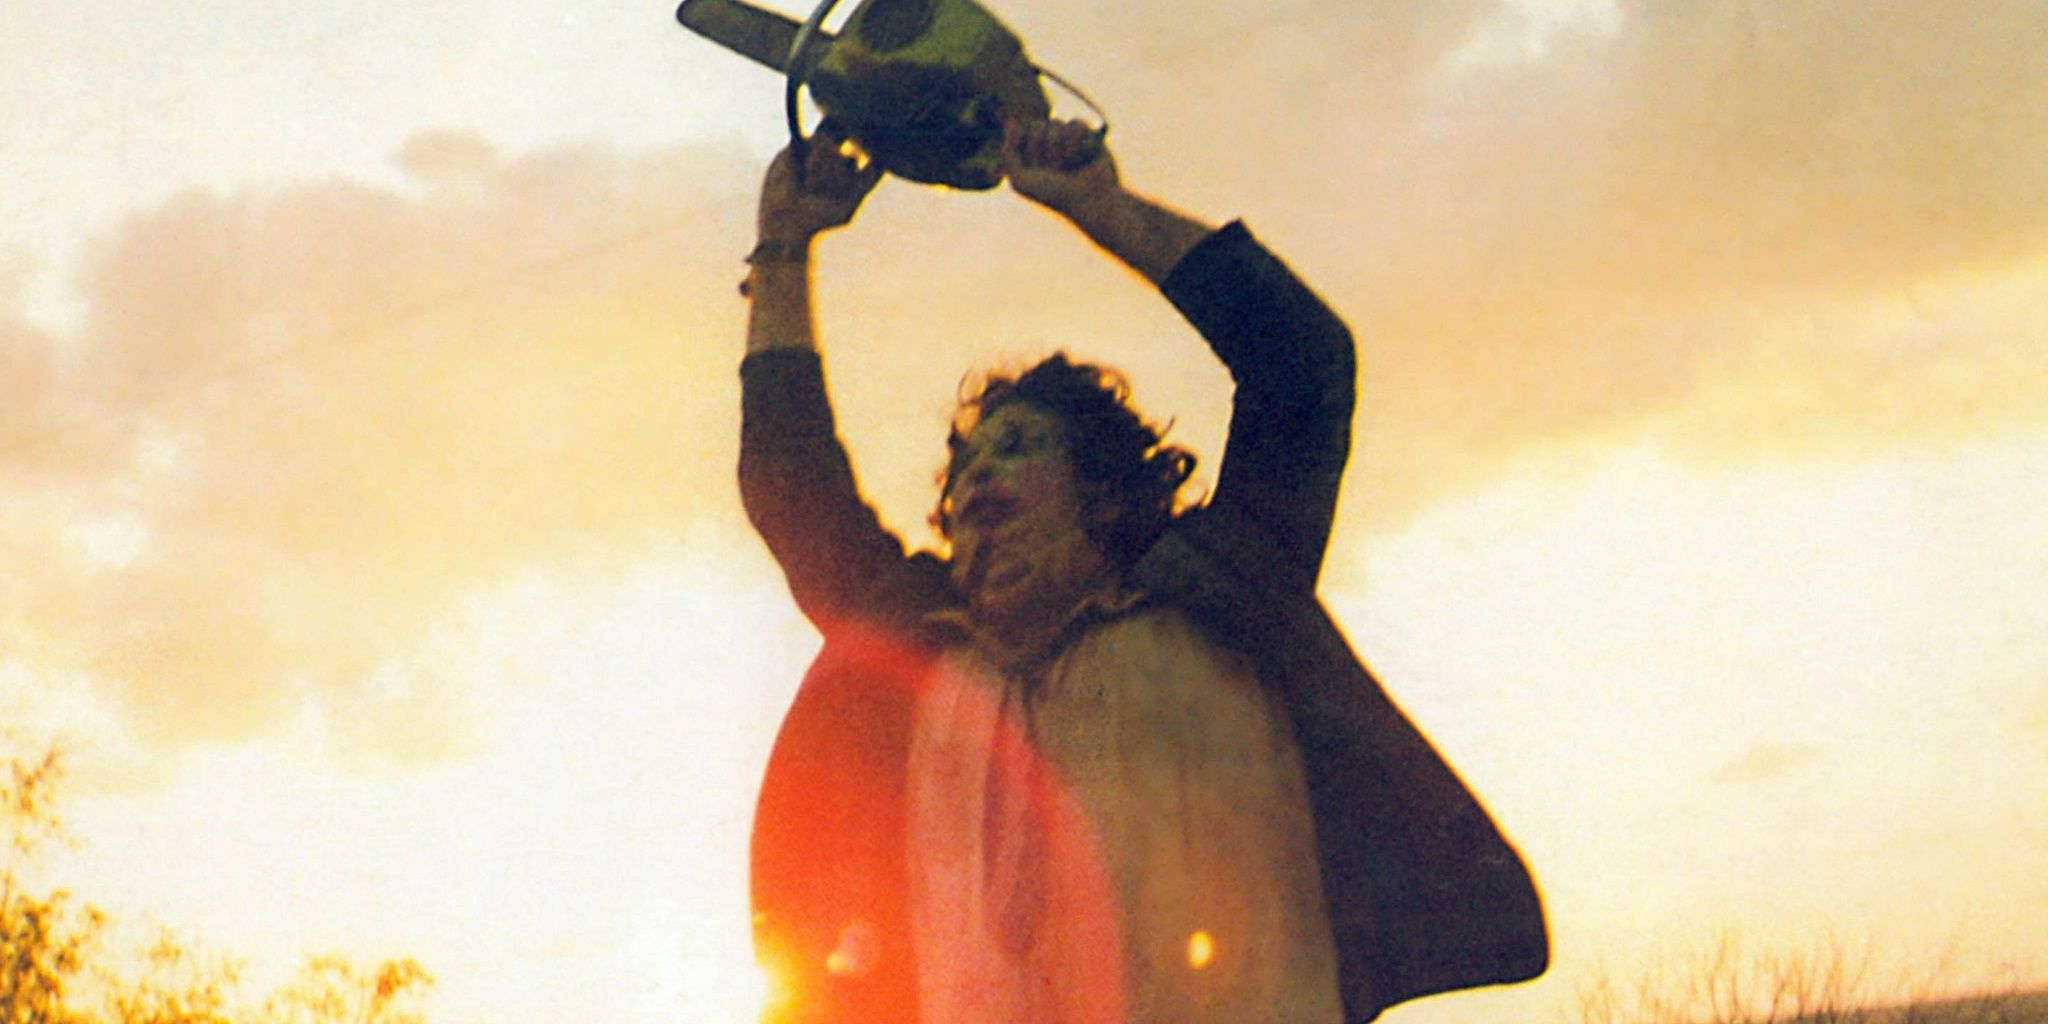 Leatherface holding chainsaw over his head in The Texas Chain Saw Massacre